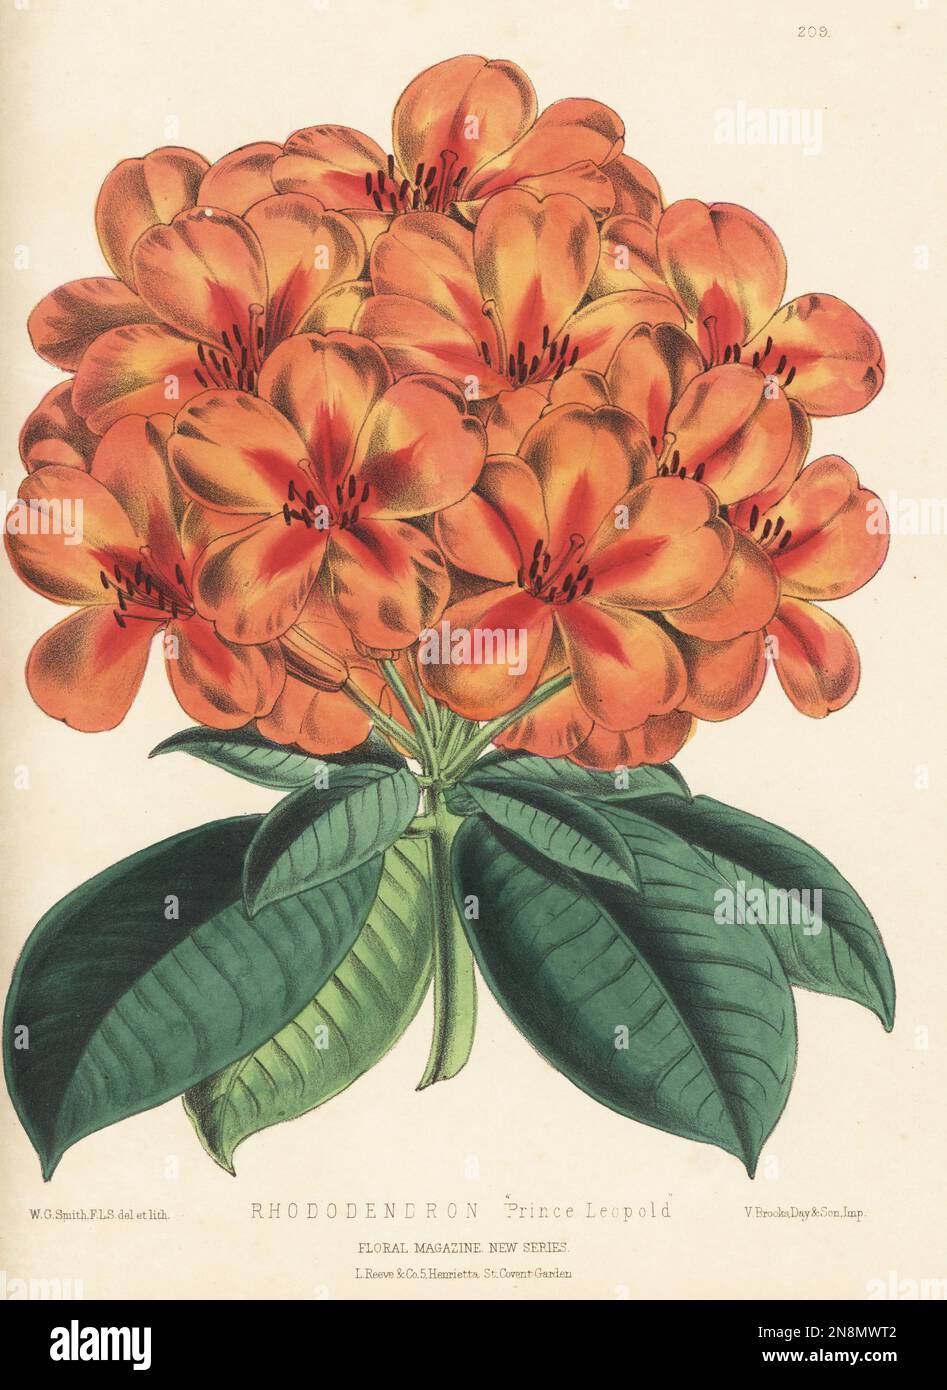 Orange rhododendron hybrid, Prince Leopold. A cross of Rhododendron lobbi x R. Princess Royal, raised by James Veitch and Sons nursery, King's Road, Chelsea. Handcolored botanical illustration drawn and lithographed by Worthington George Smith from Henry Honywood Dombrain's Floral Magazine, New Series, Volume 5, L. Reeve, London, 1876. Lithograph printed by Vincent Brooks, Day & Son. Stock Photo